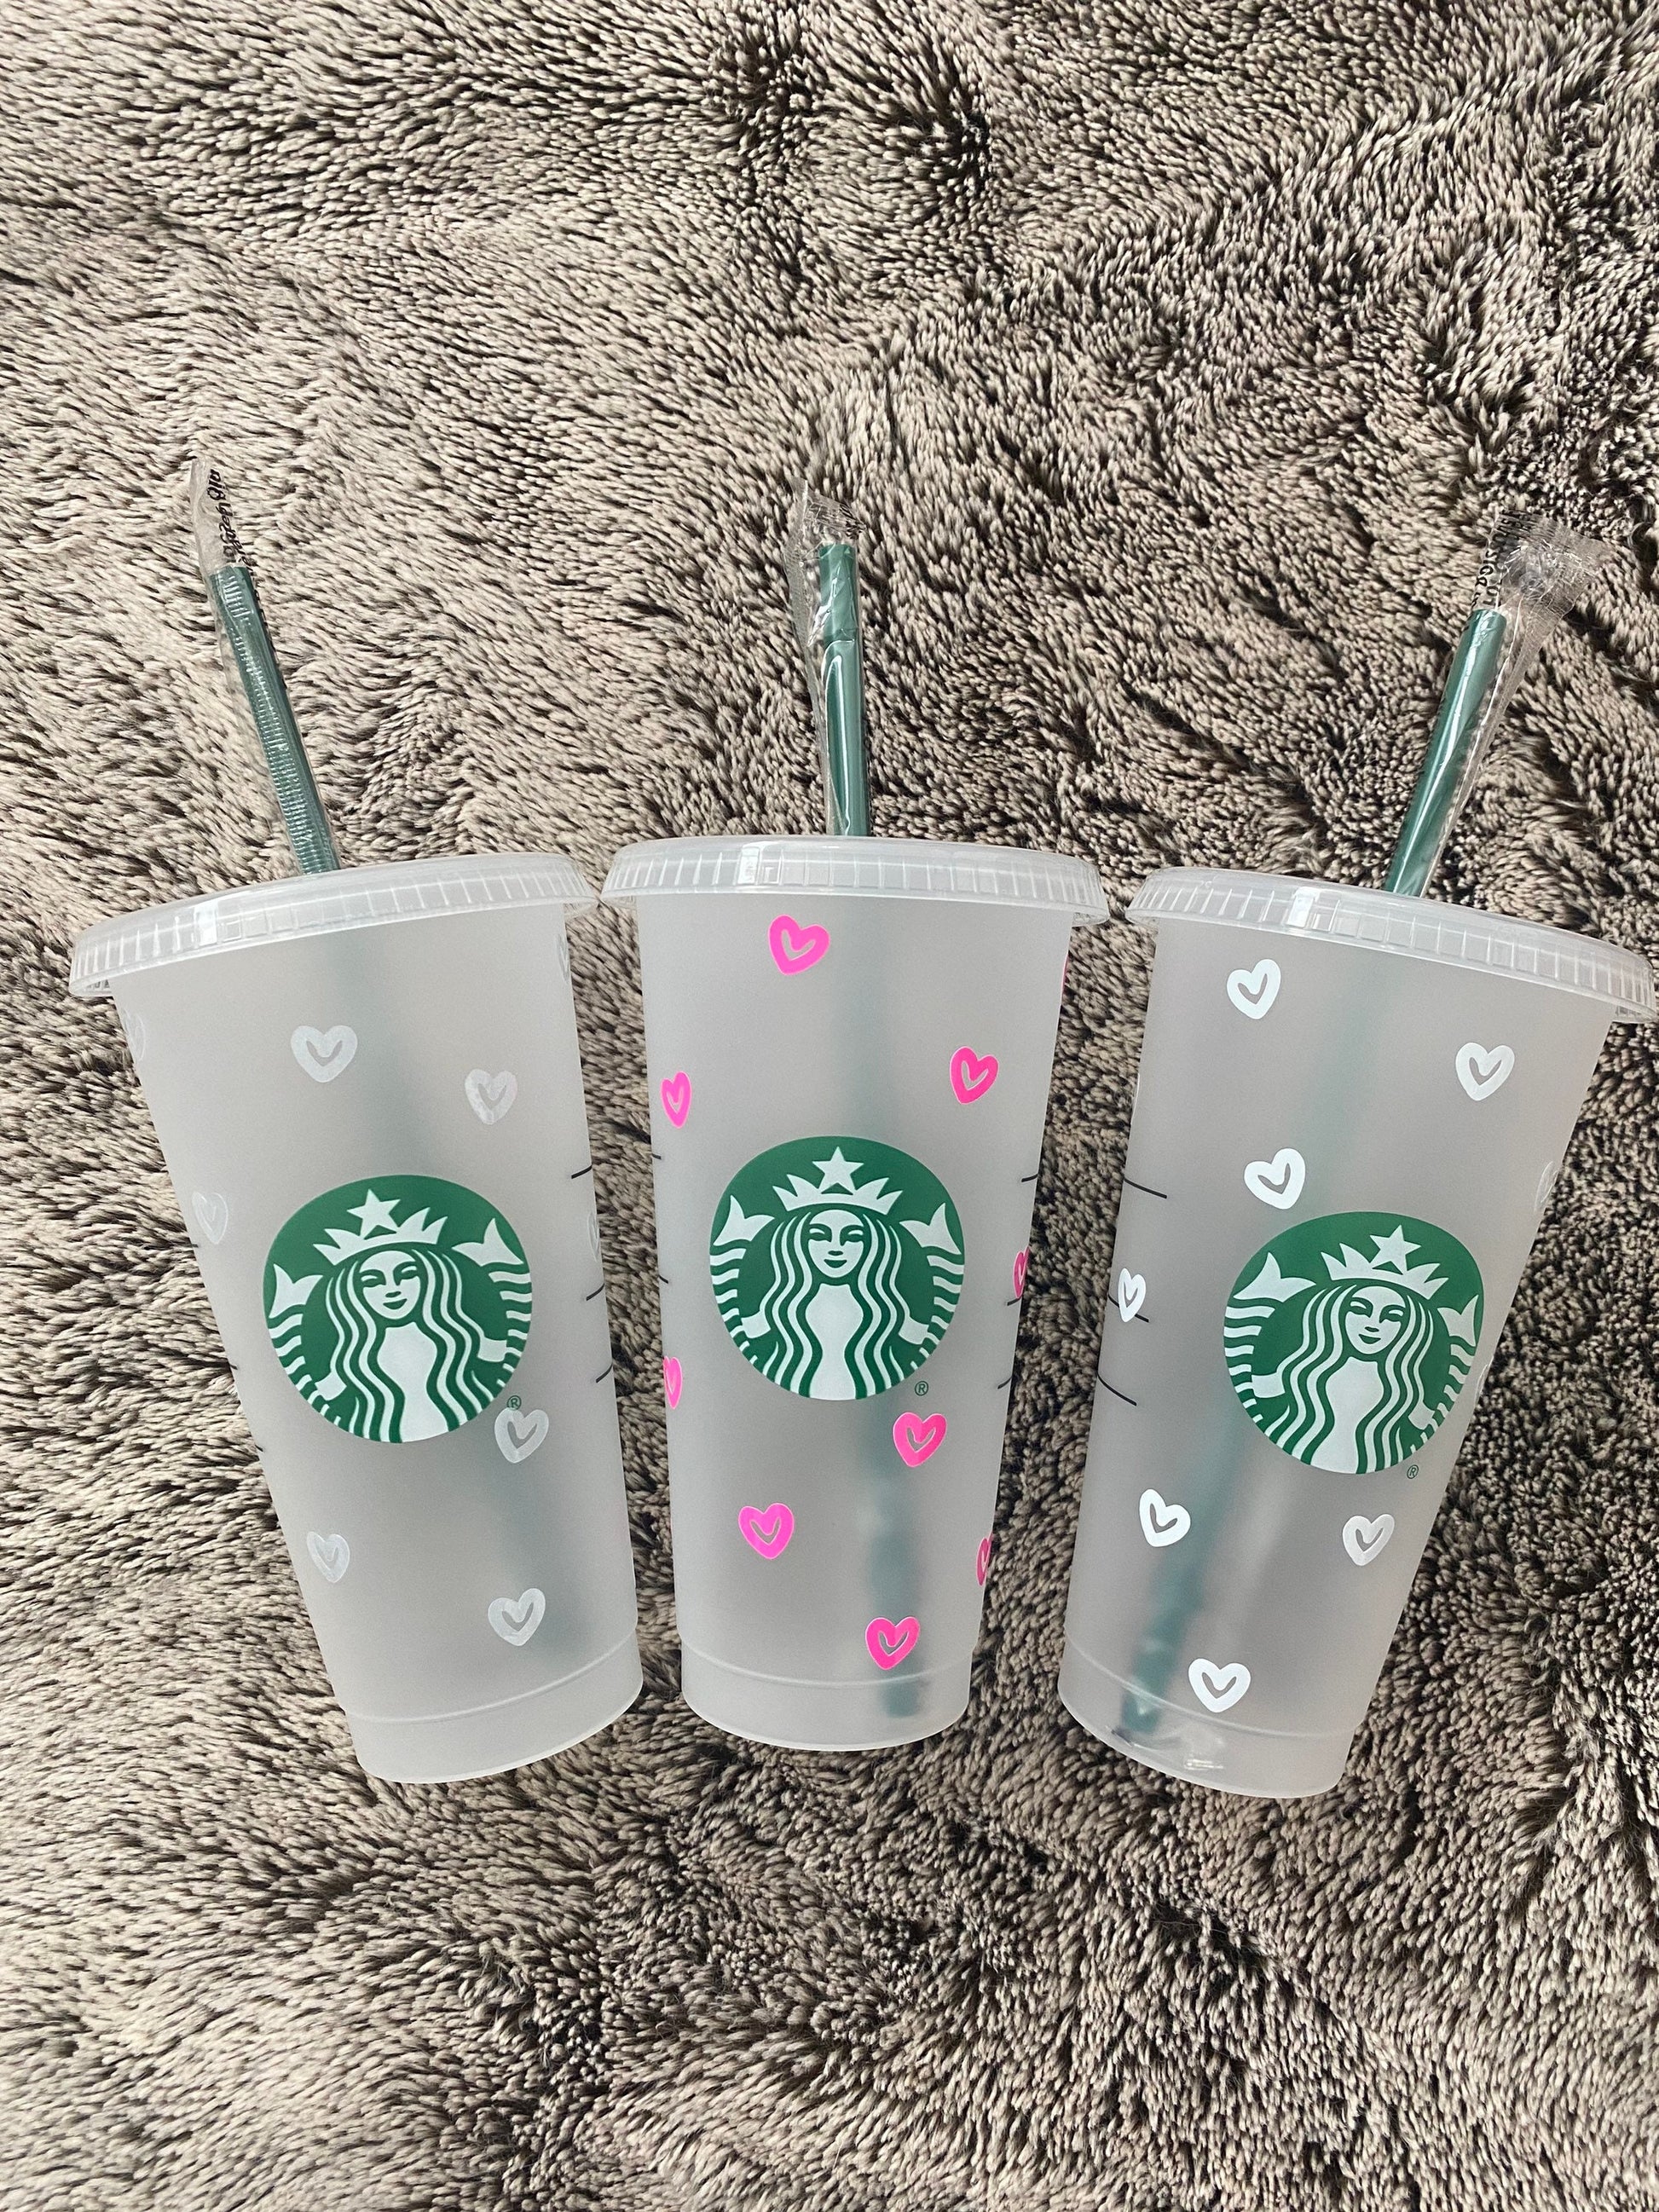 STARBUCKS BULK 5 Reusable Venti 24oz Ice Cold Drink Cups With Lid